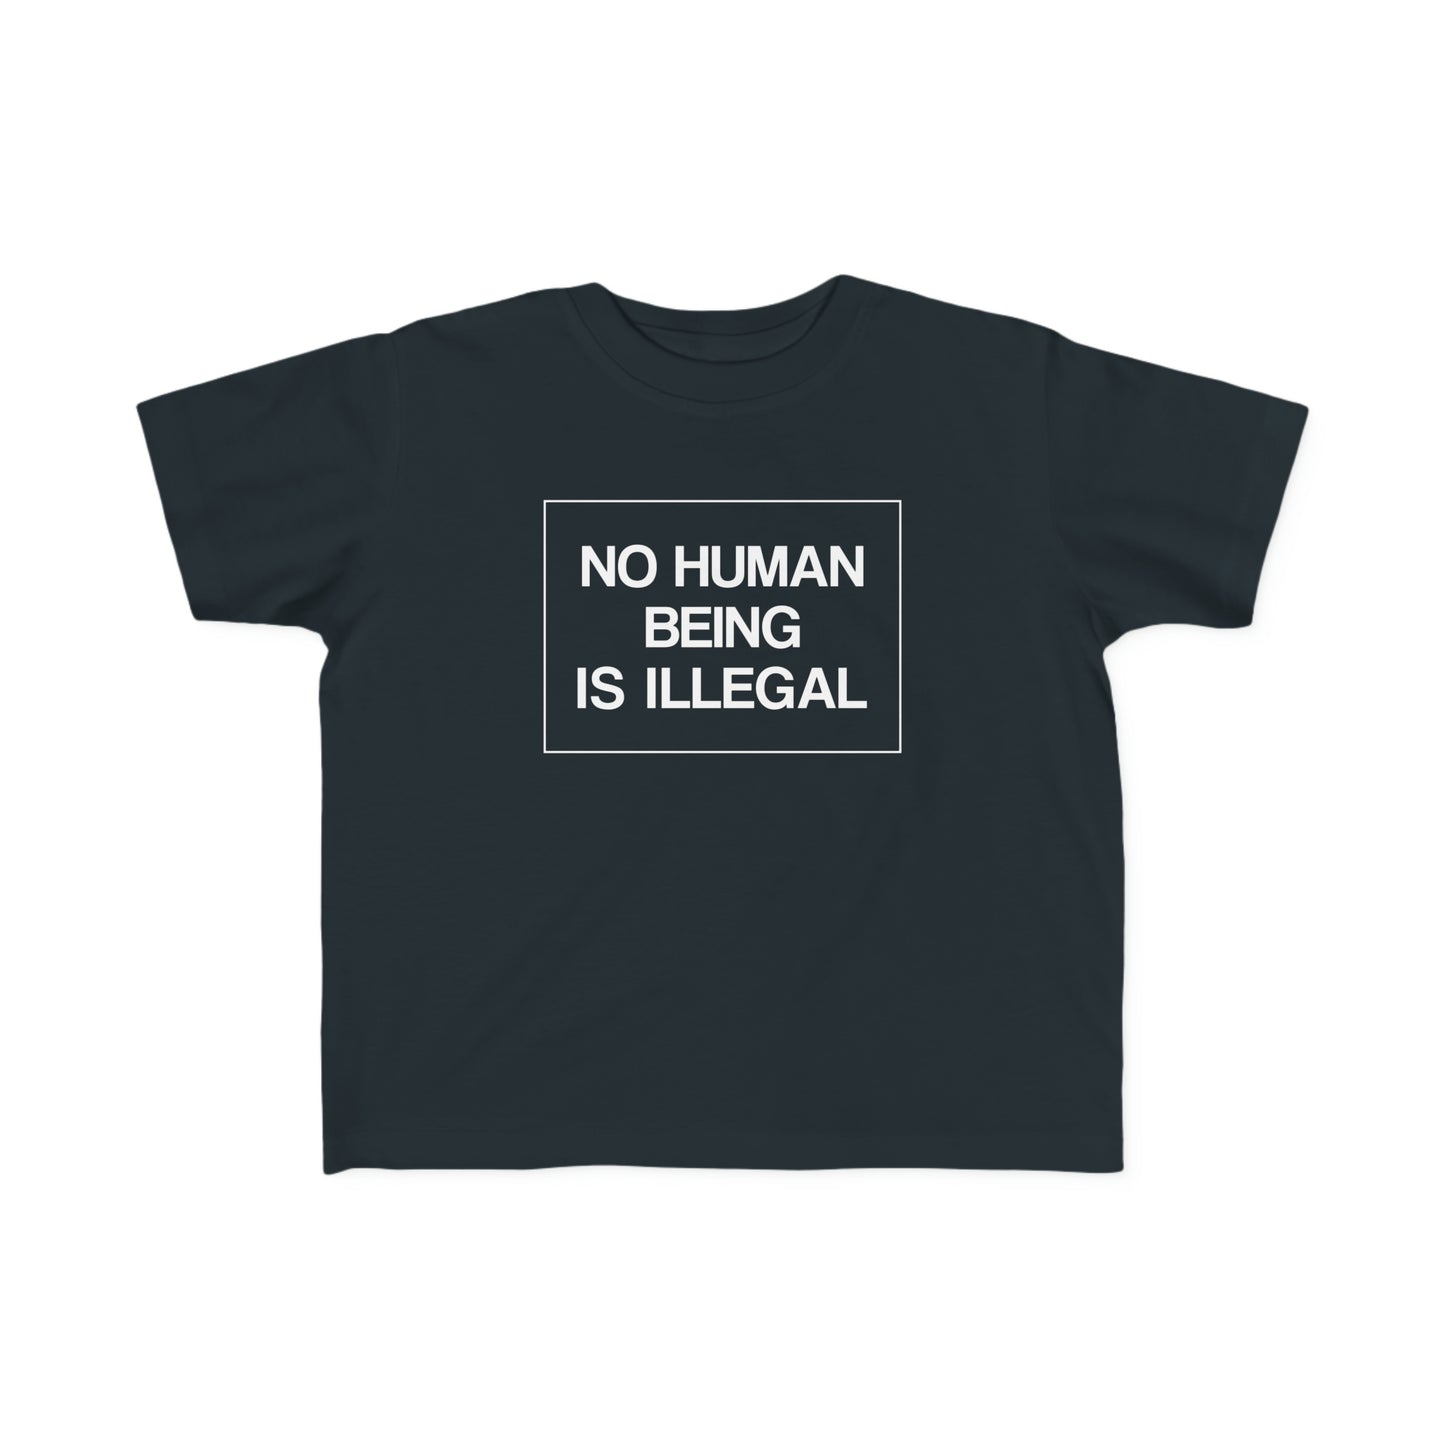 “No Human Being is Illegal” Toddler's Tee